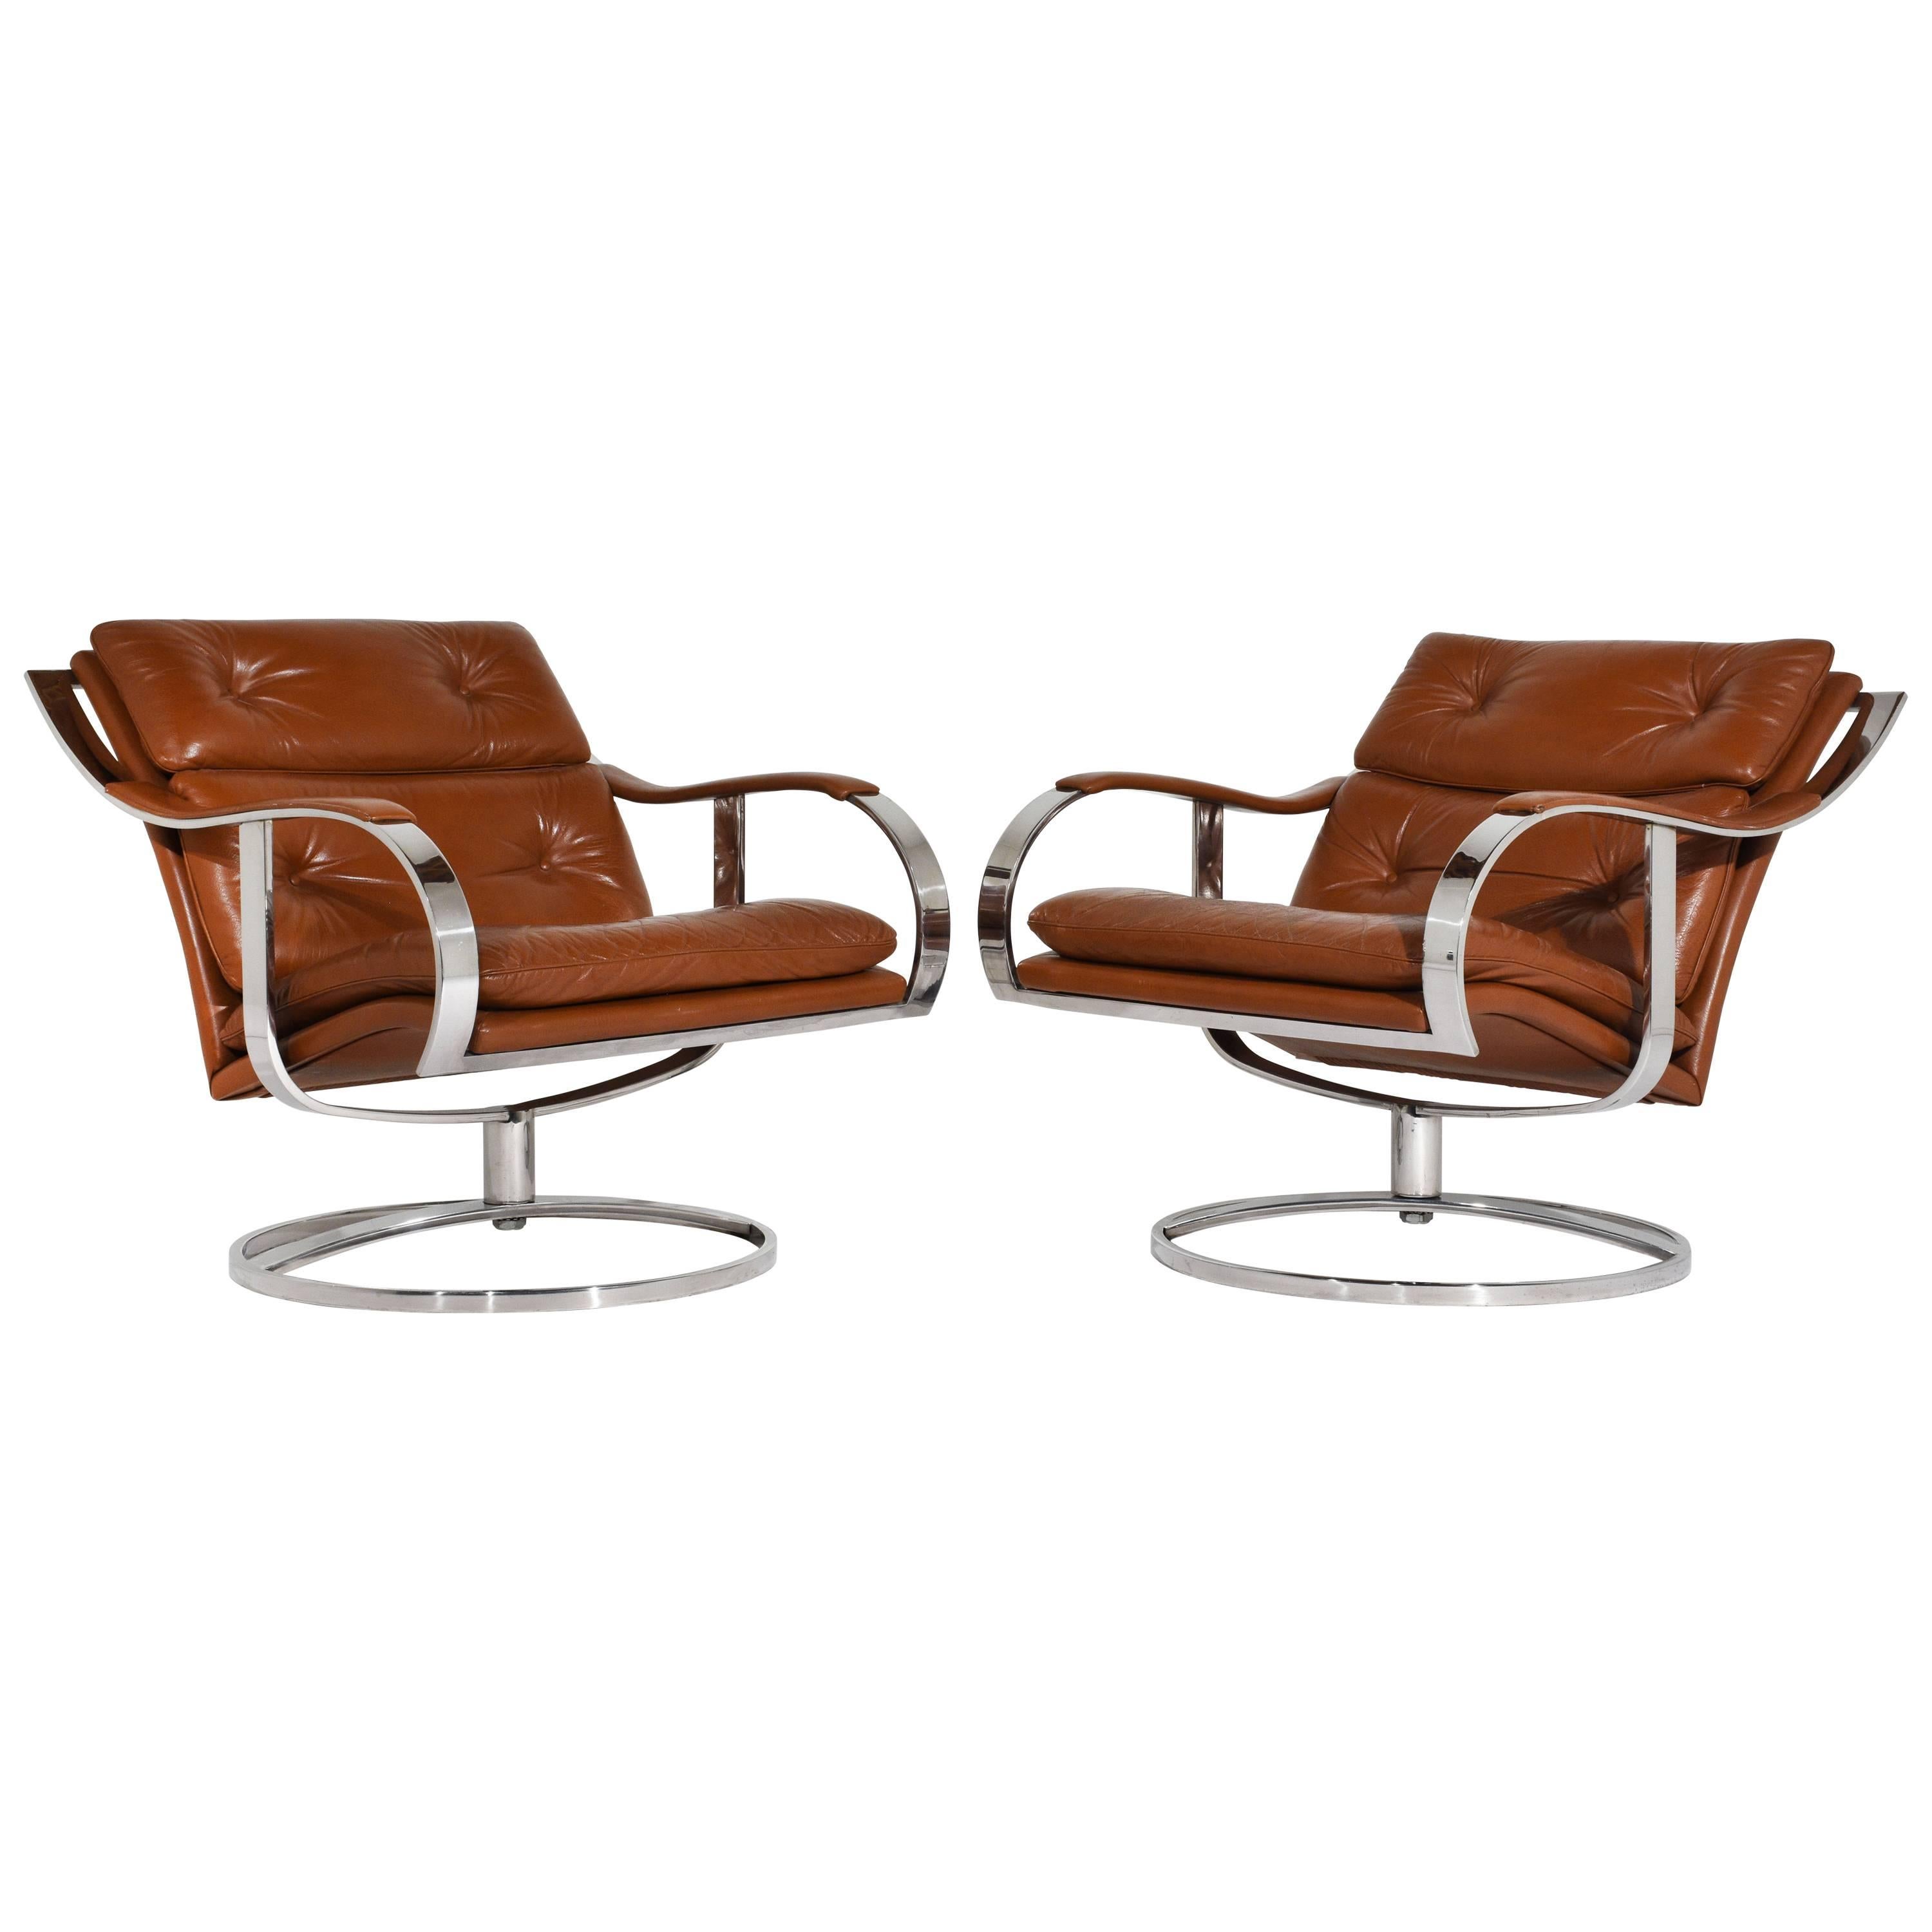 Pair of Mid-Century Modern Leather Gardner Leaver Lounge Chairs